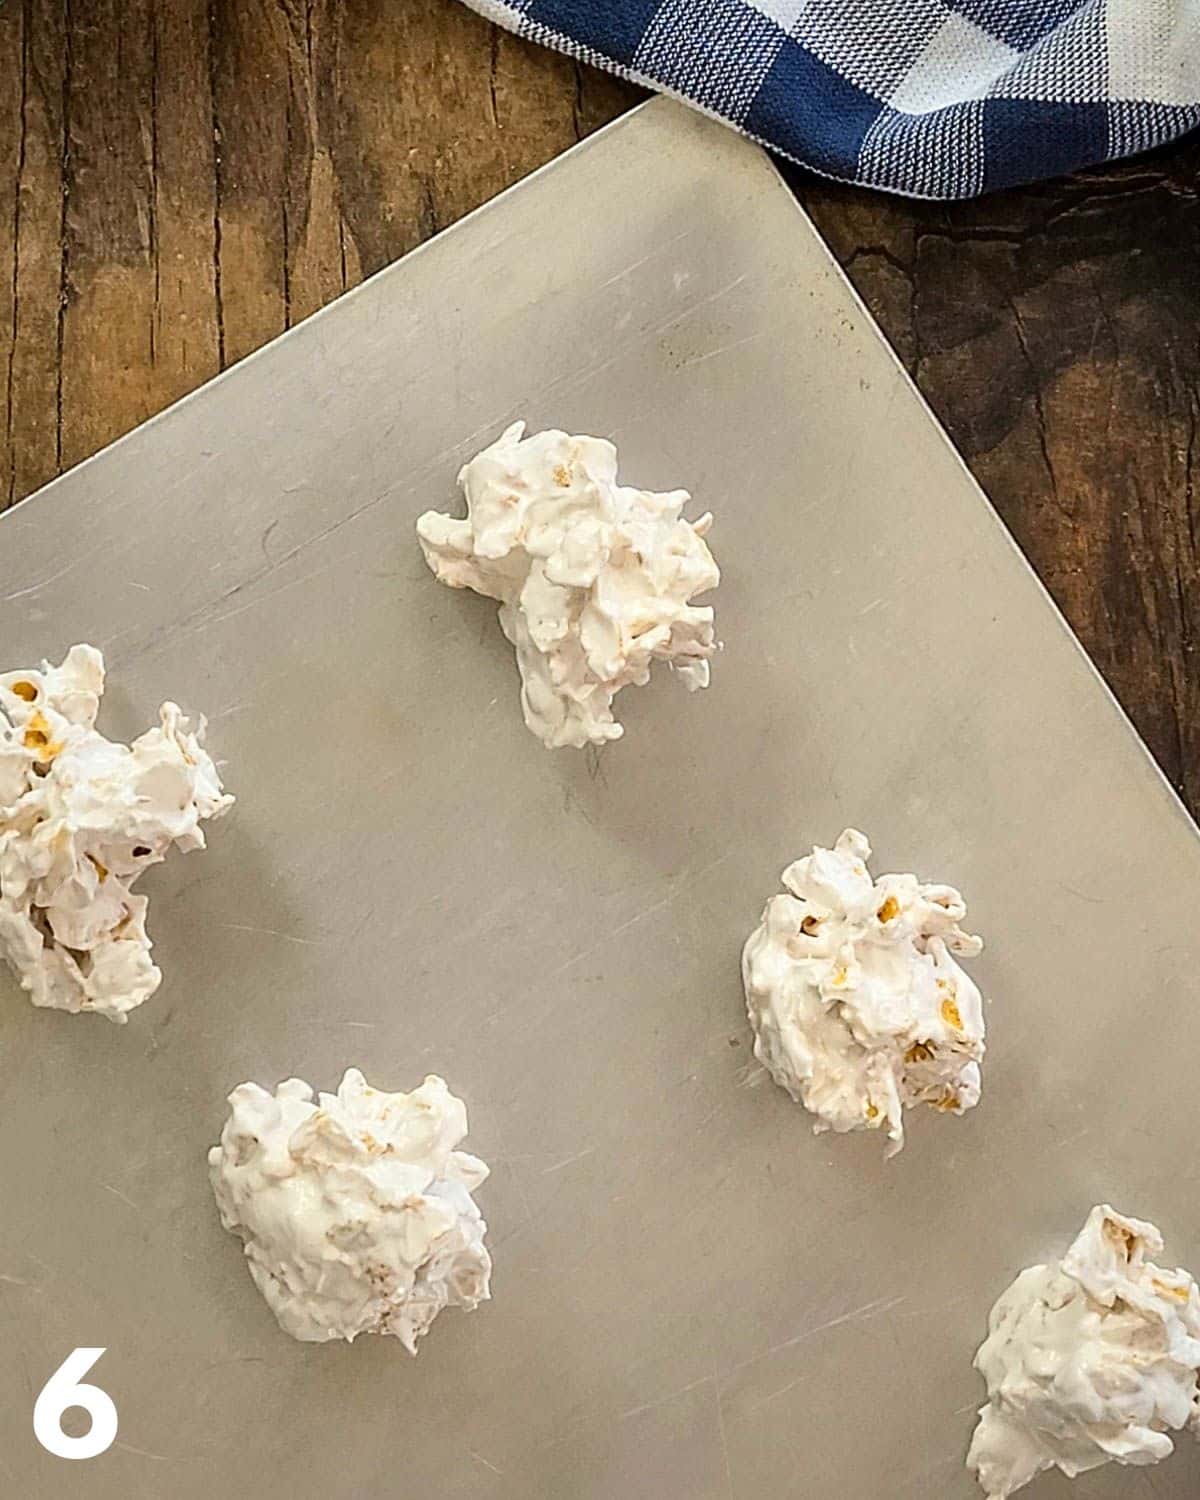 Corn flake meringue cookies on a baking sheet ready for the oven.